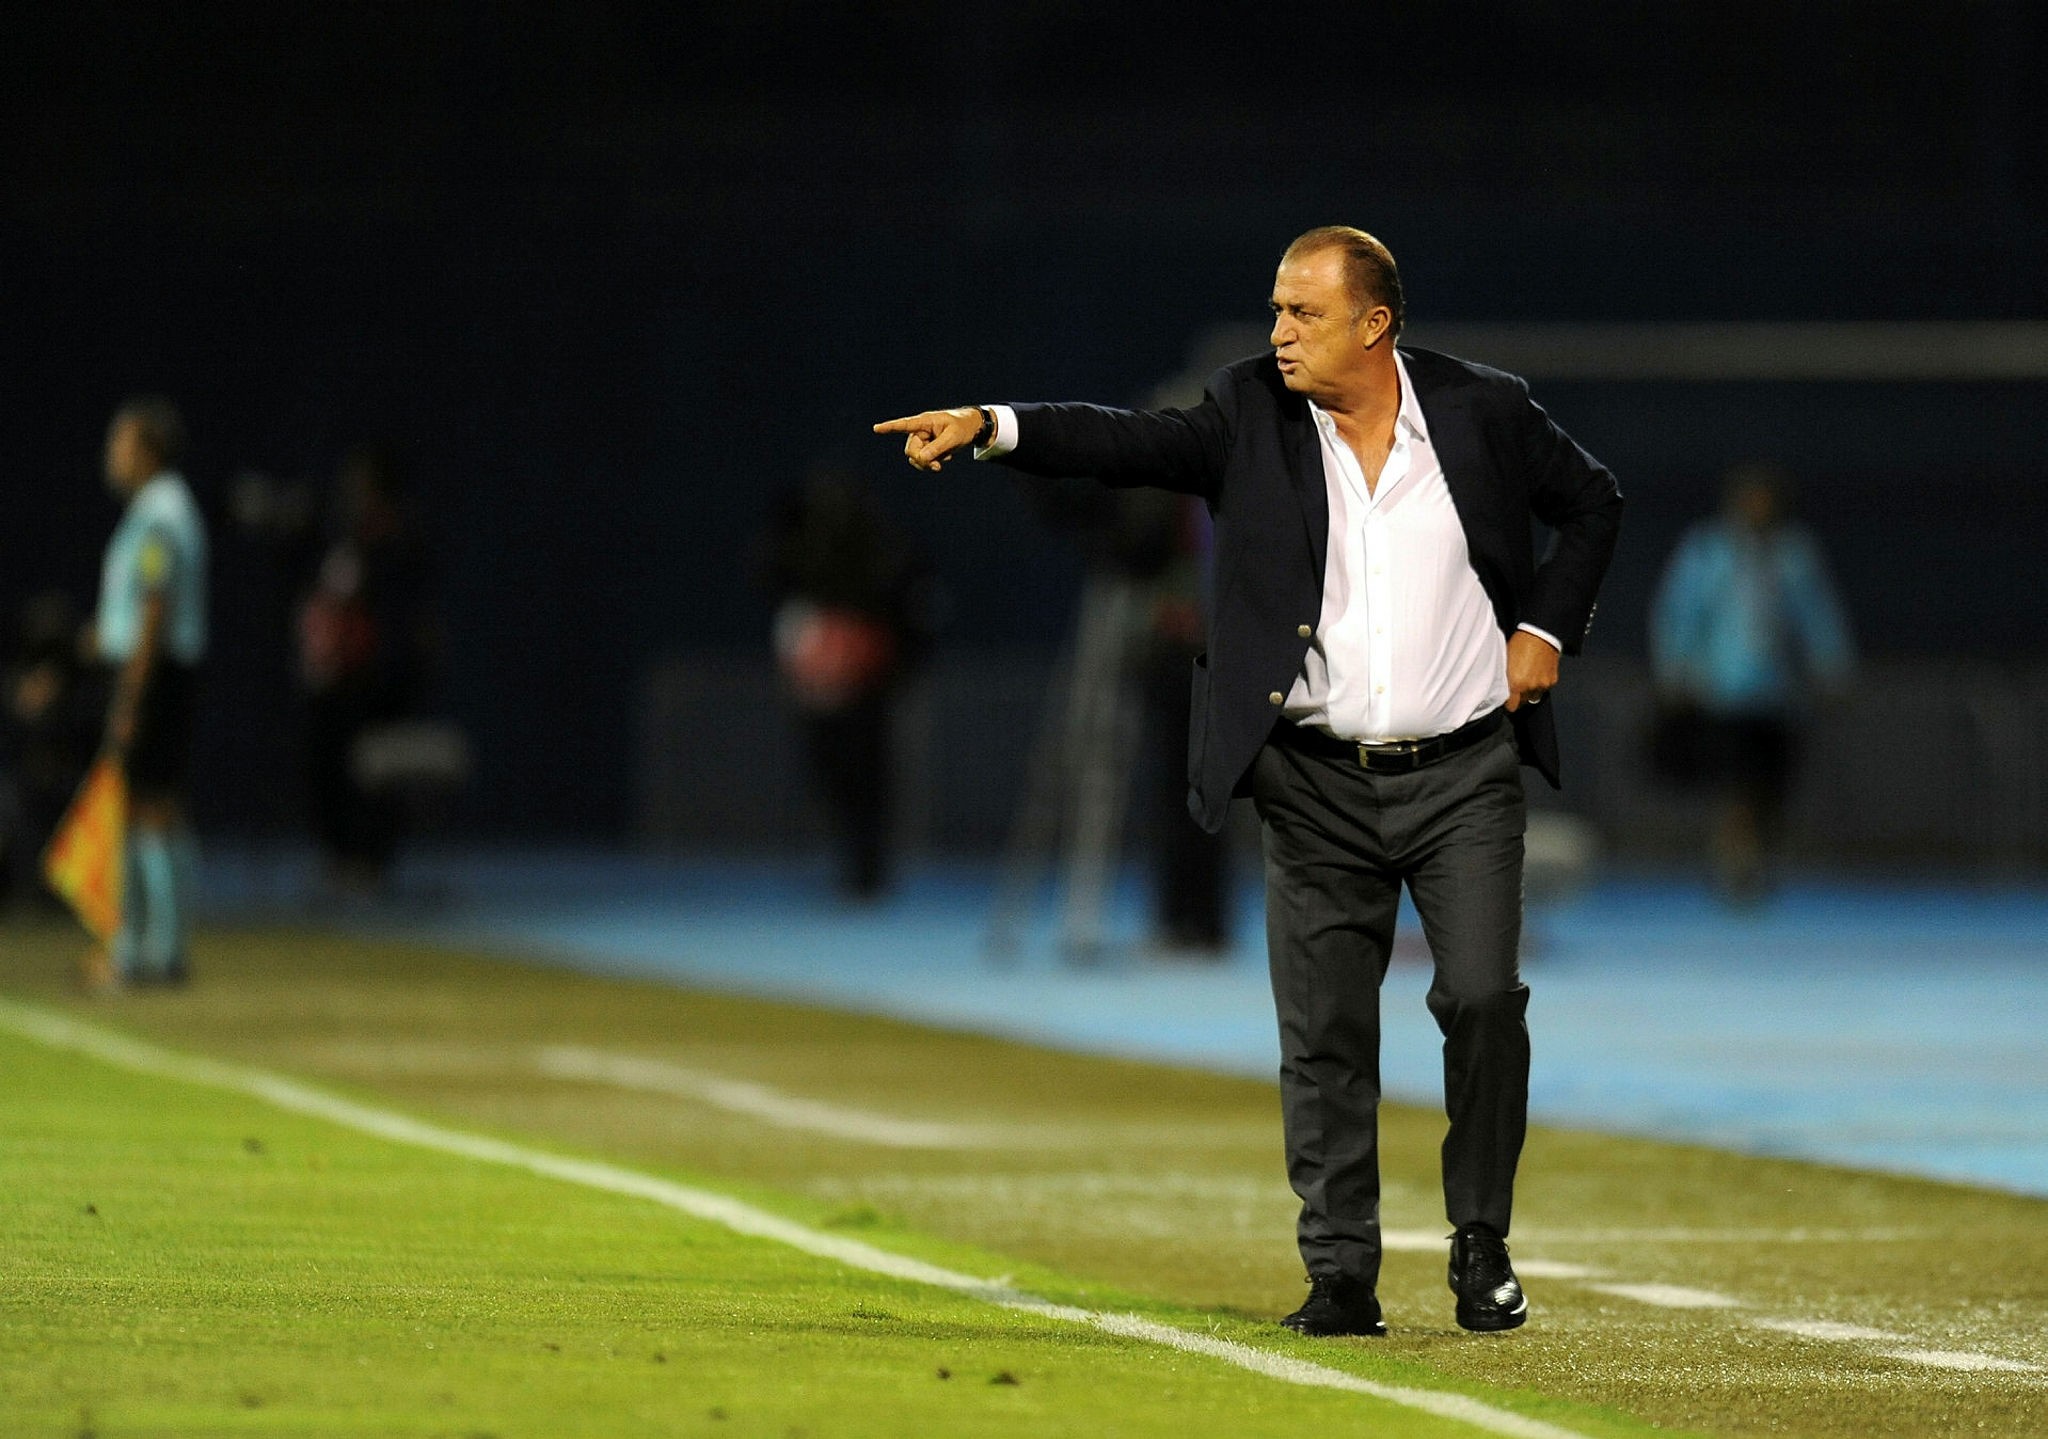 Turkey's head coach Fatih Terim gestures during the World Cup 2018 qualifier football match Croatia vs Turkey at Maksimir stadium in Zagreb, on September 5, 2016. (AFP PHOTO)